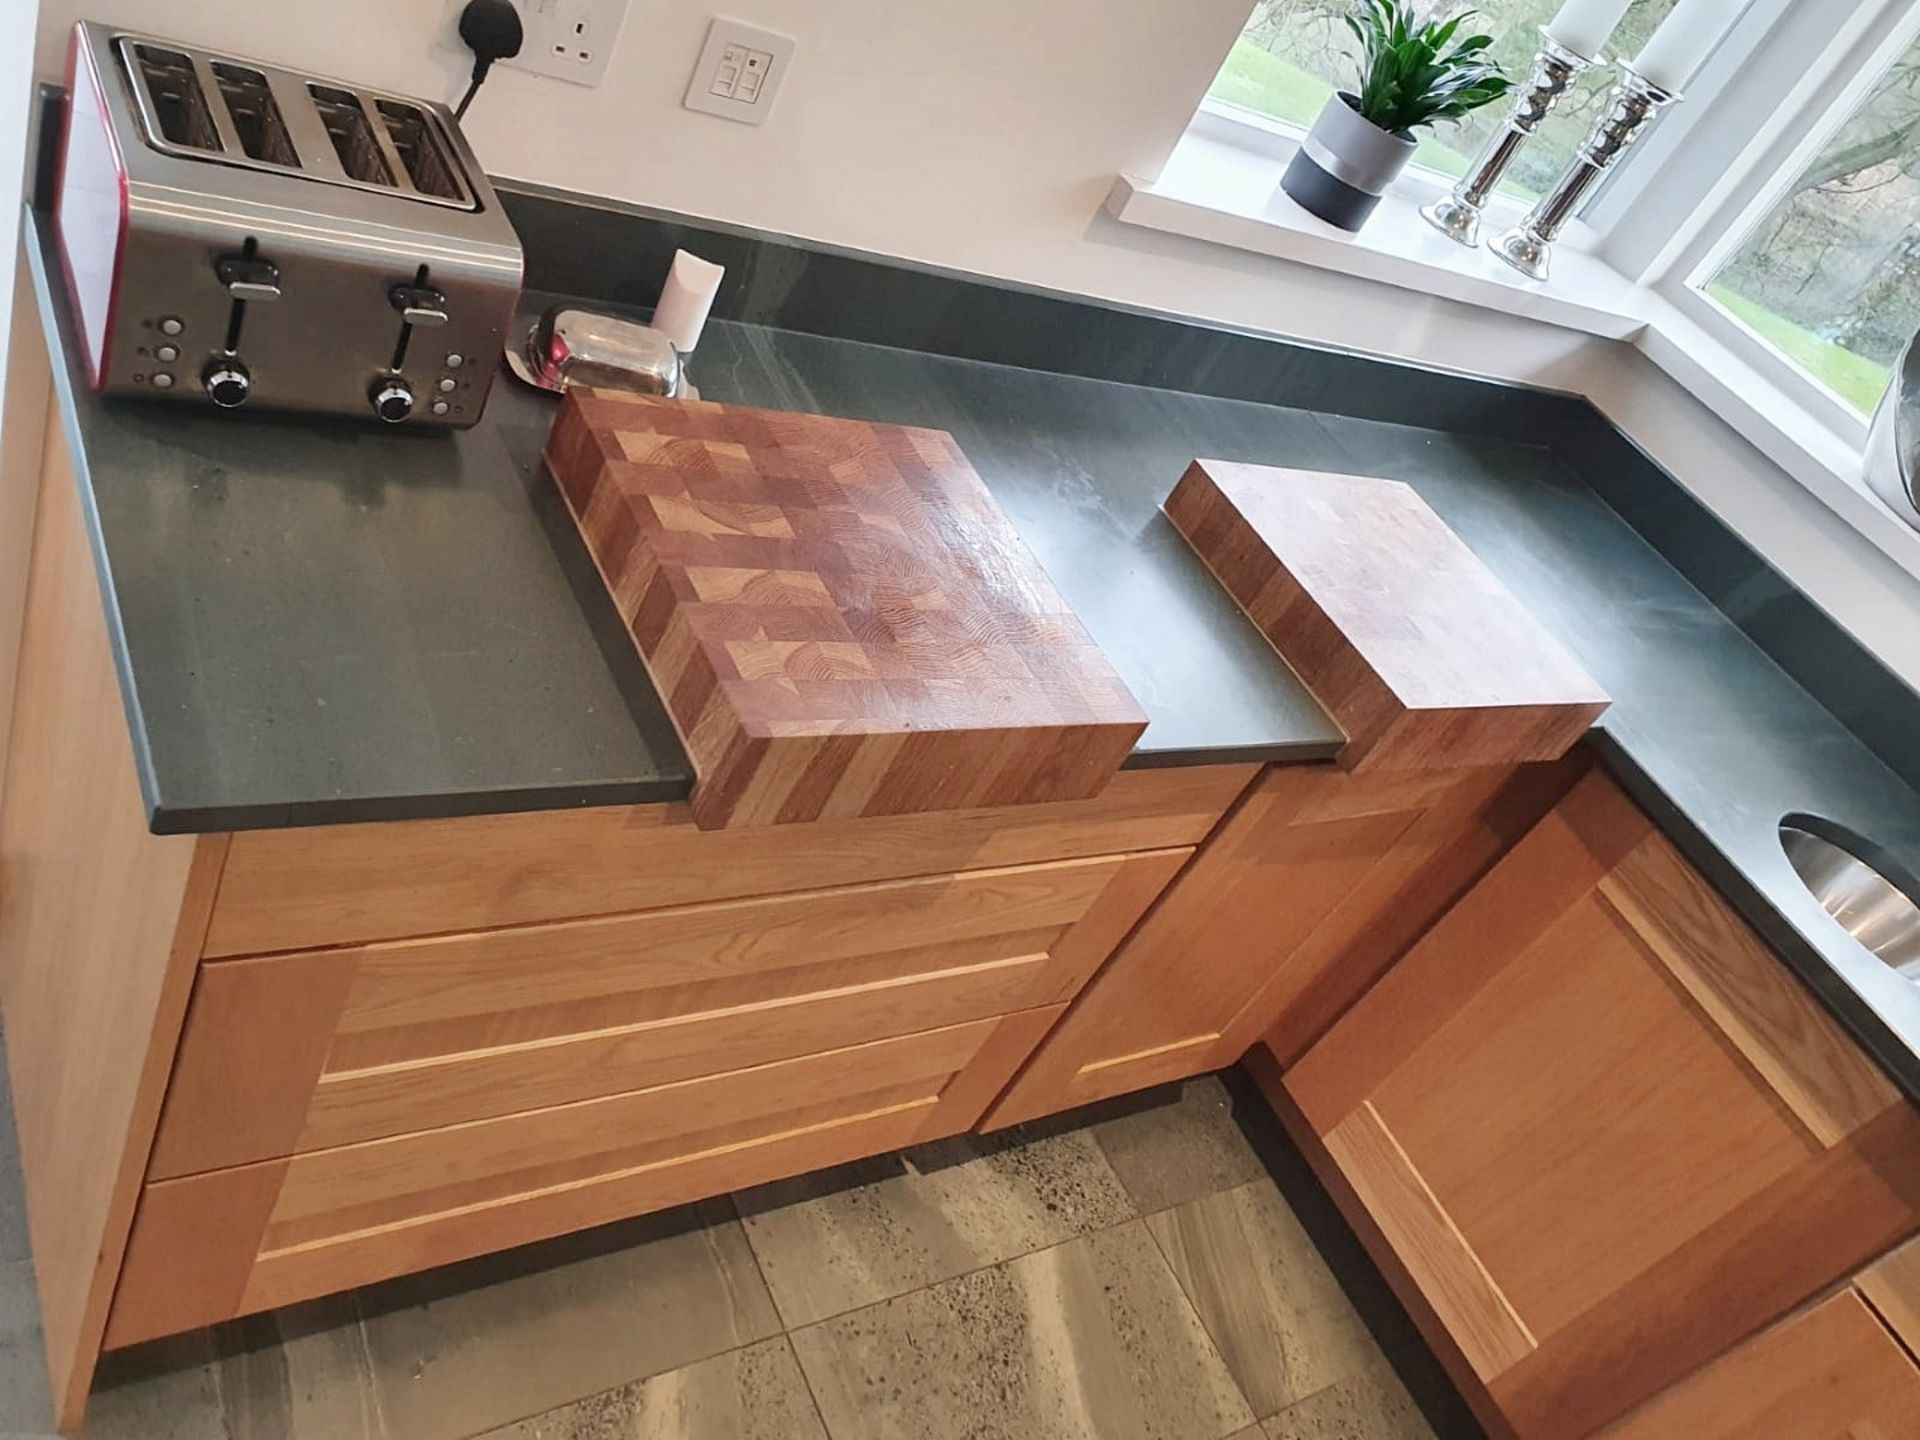 1 x Solid Oak Fitted Kitchen With Intergrated Miele Appliancess - CL487 - Location: Wigan *NO VAT* - Image 23 of 82